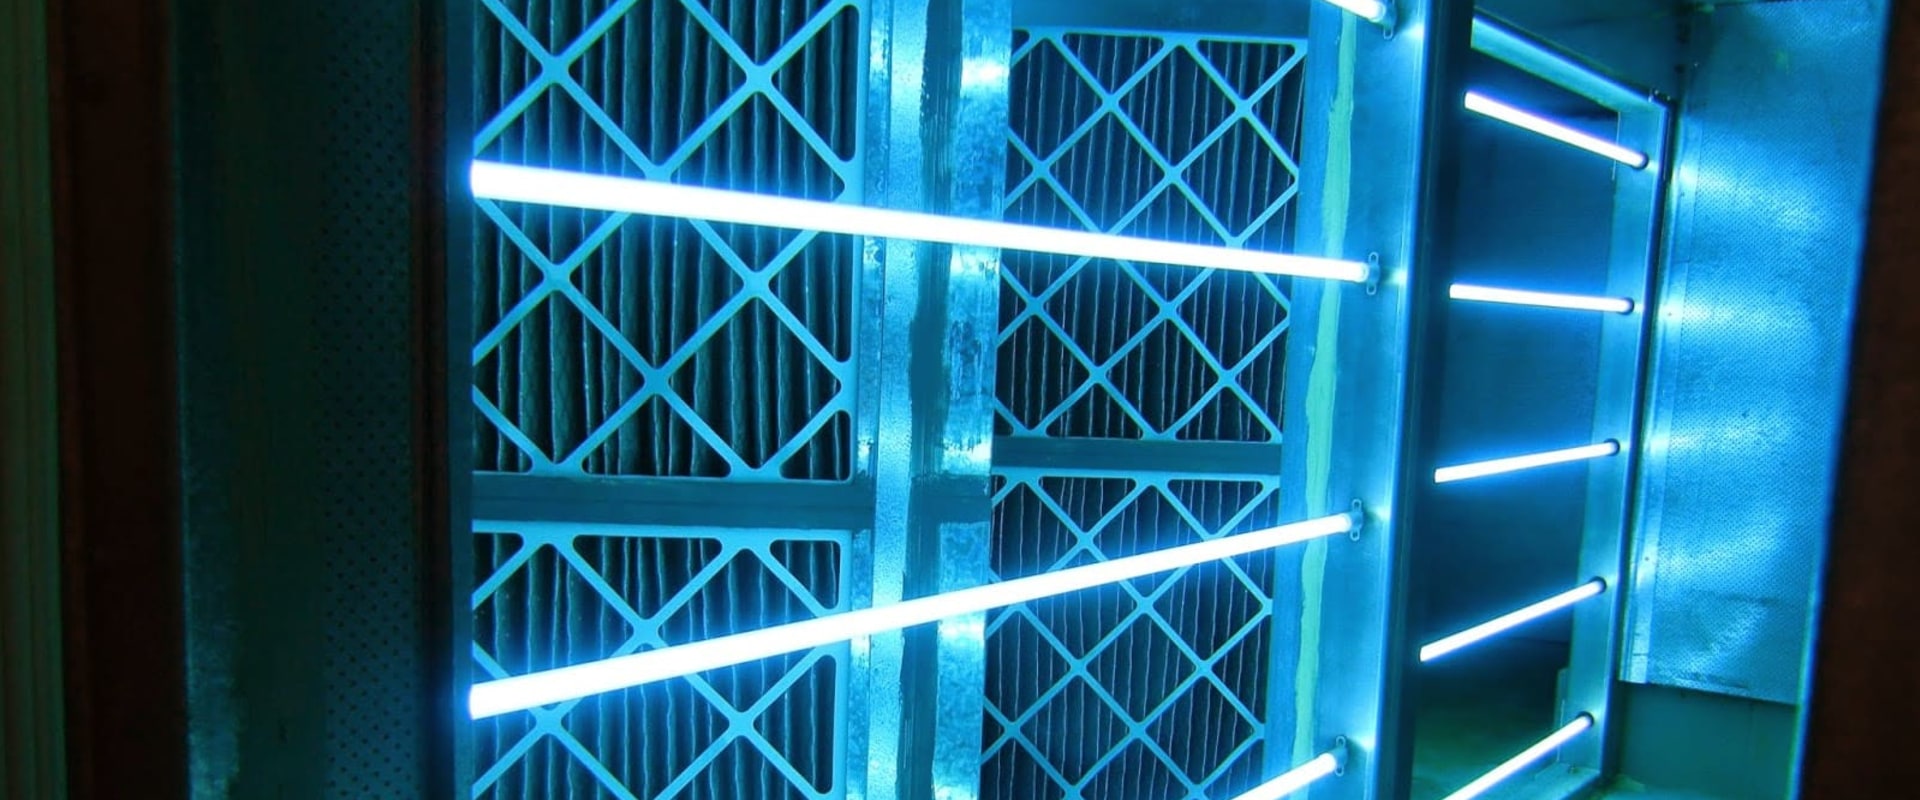 UV Light Installation in West Palm Beach, FL: What You Need to Know